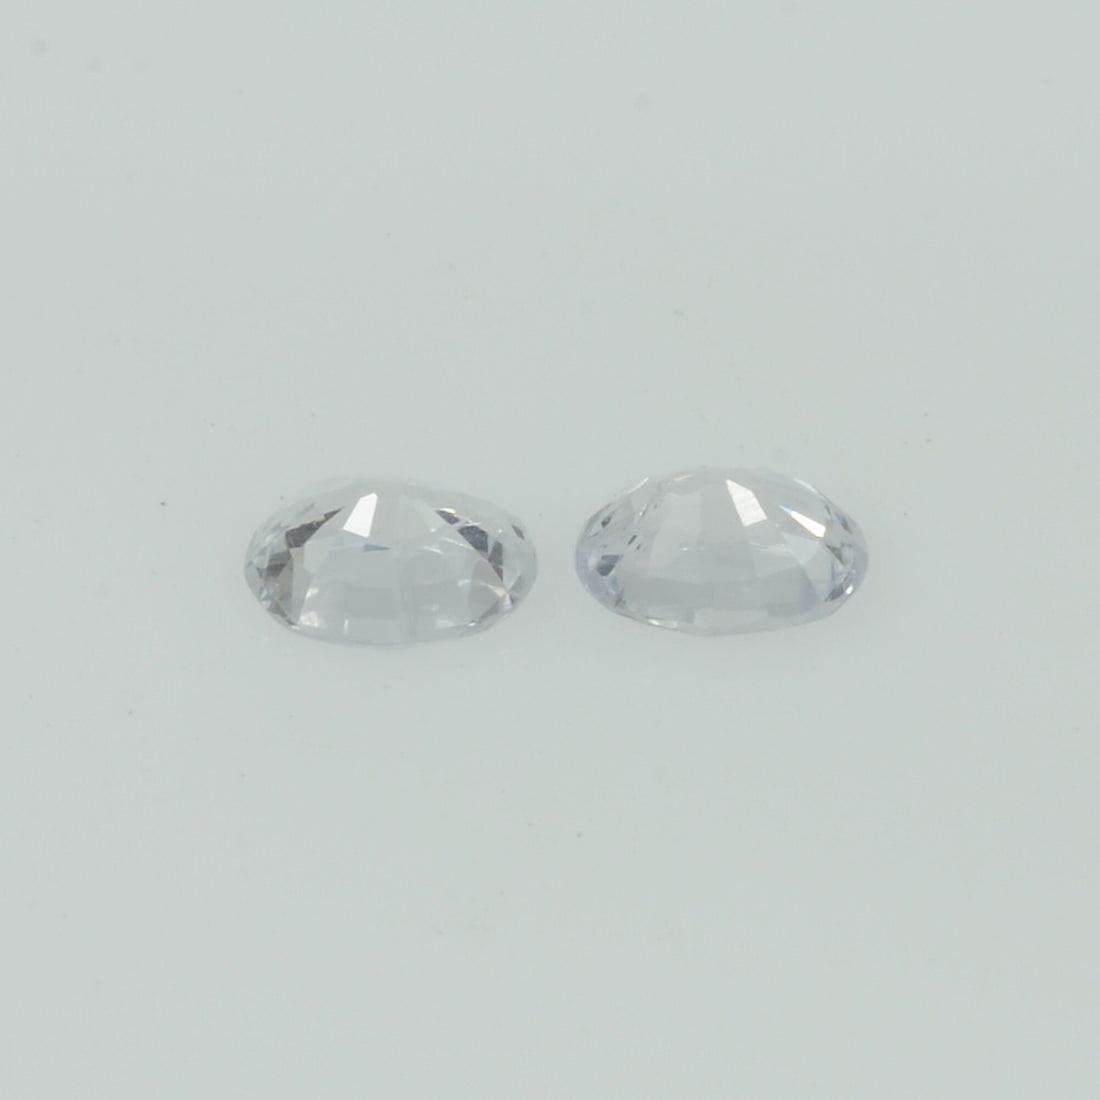 4x3 mm Lot Natural white Sapphire Loose Gemstone VS Quality Oval Cut